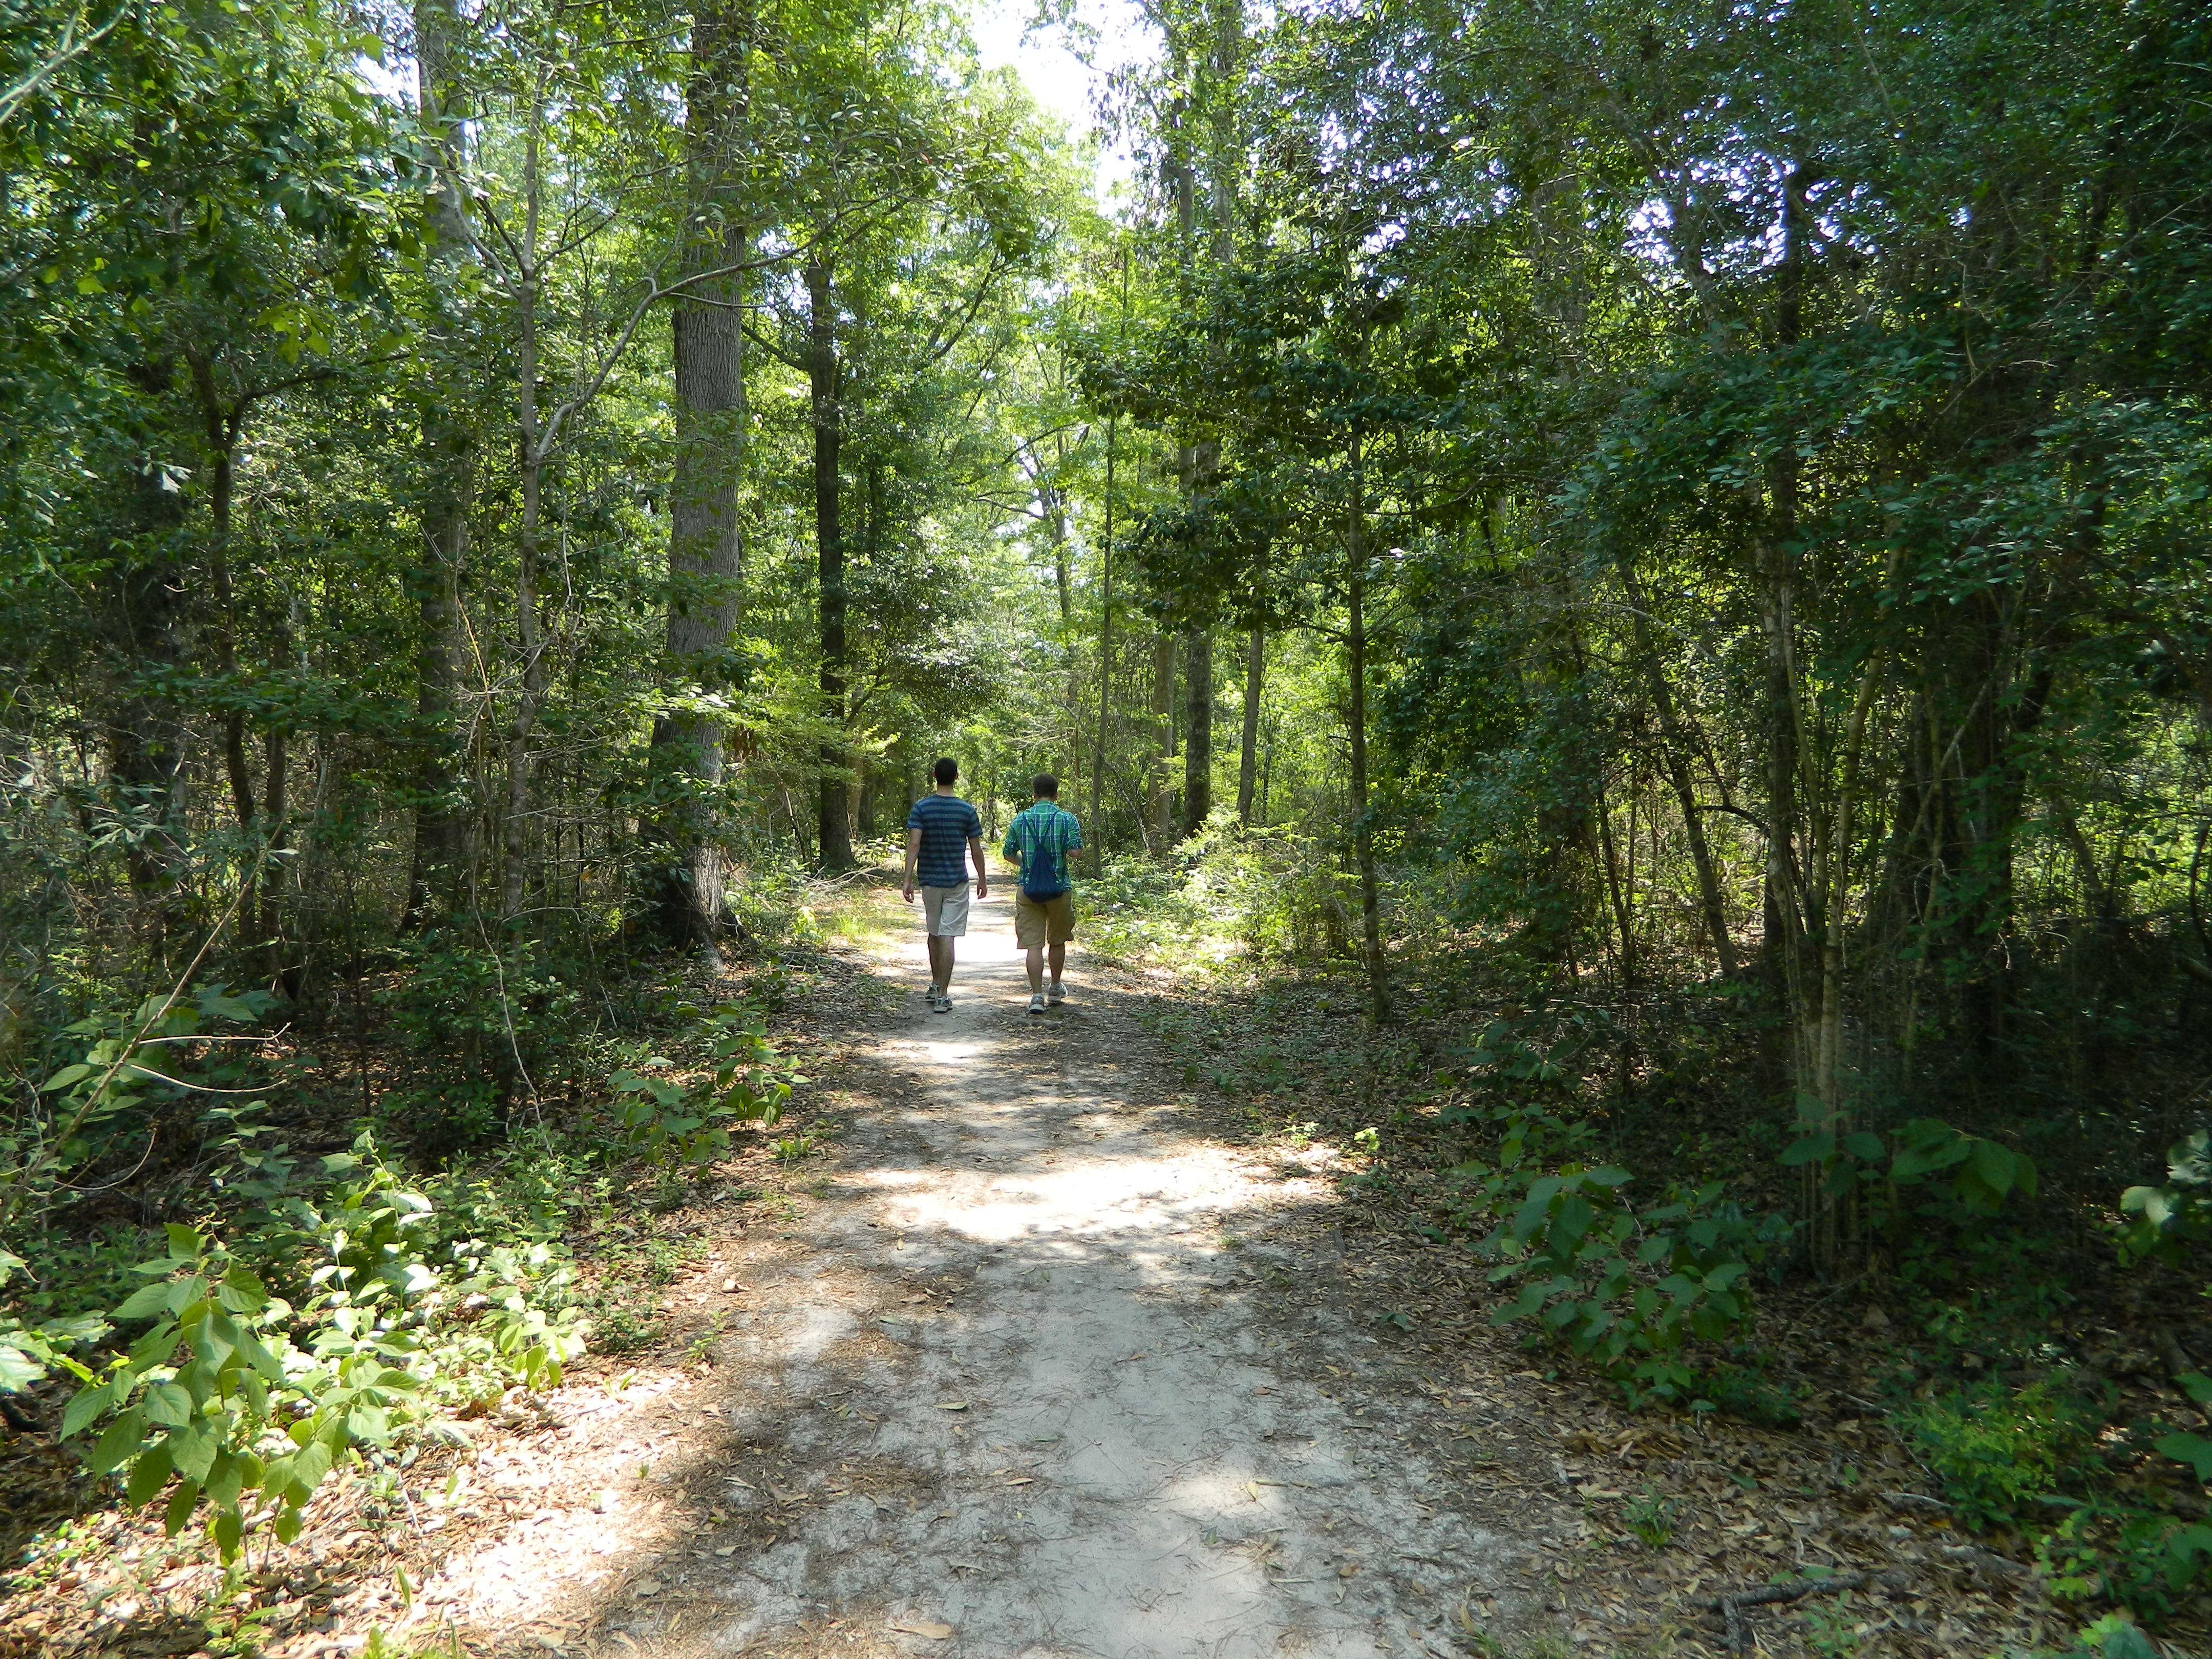 Two young men seen from behind walking down a dirt trail through a forest.